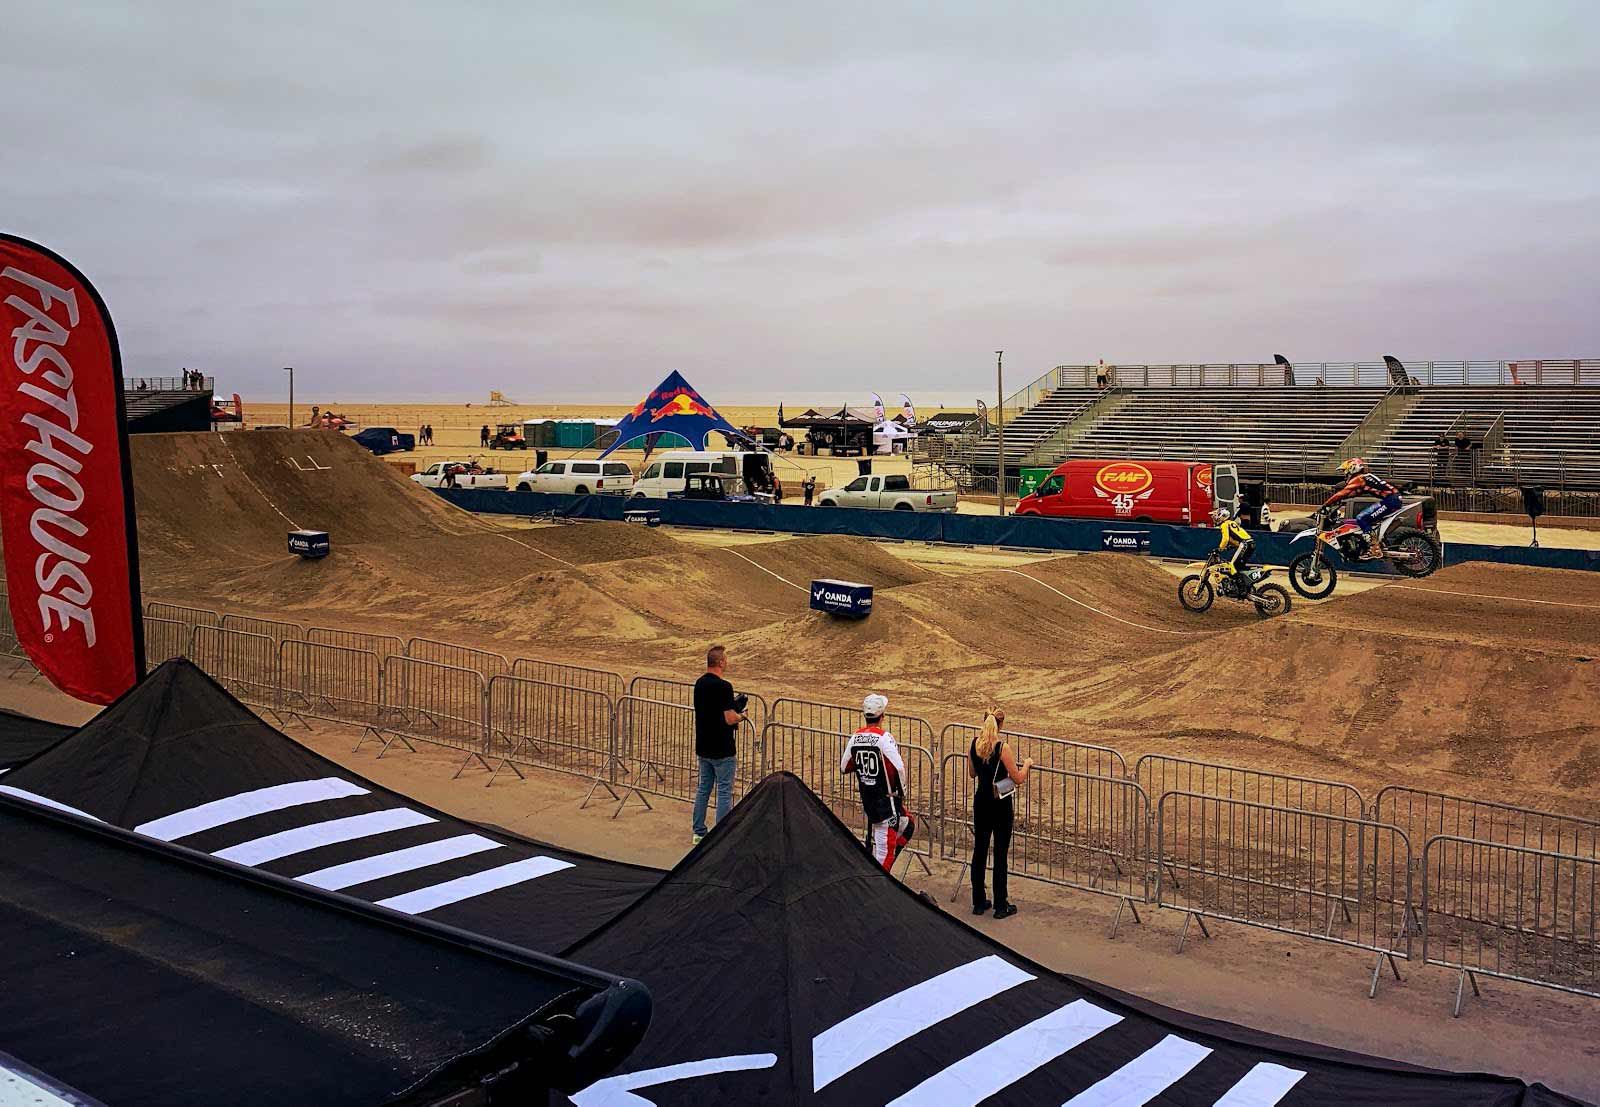 Warmup runs on the incredible Straight Rhythm track built with hundreds of truckloads of dirt brought out to the beach.